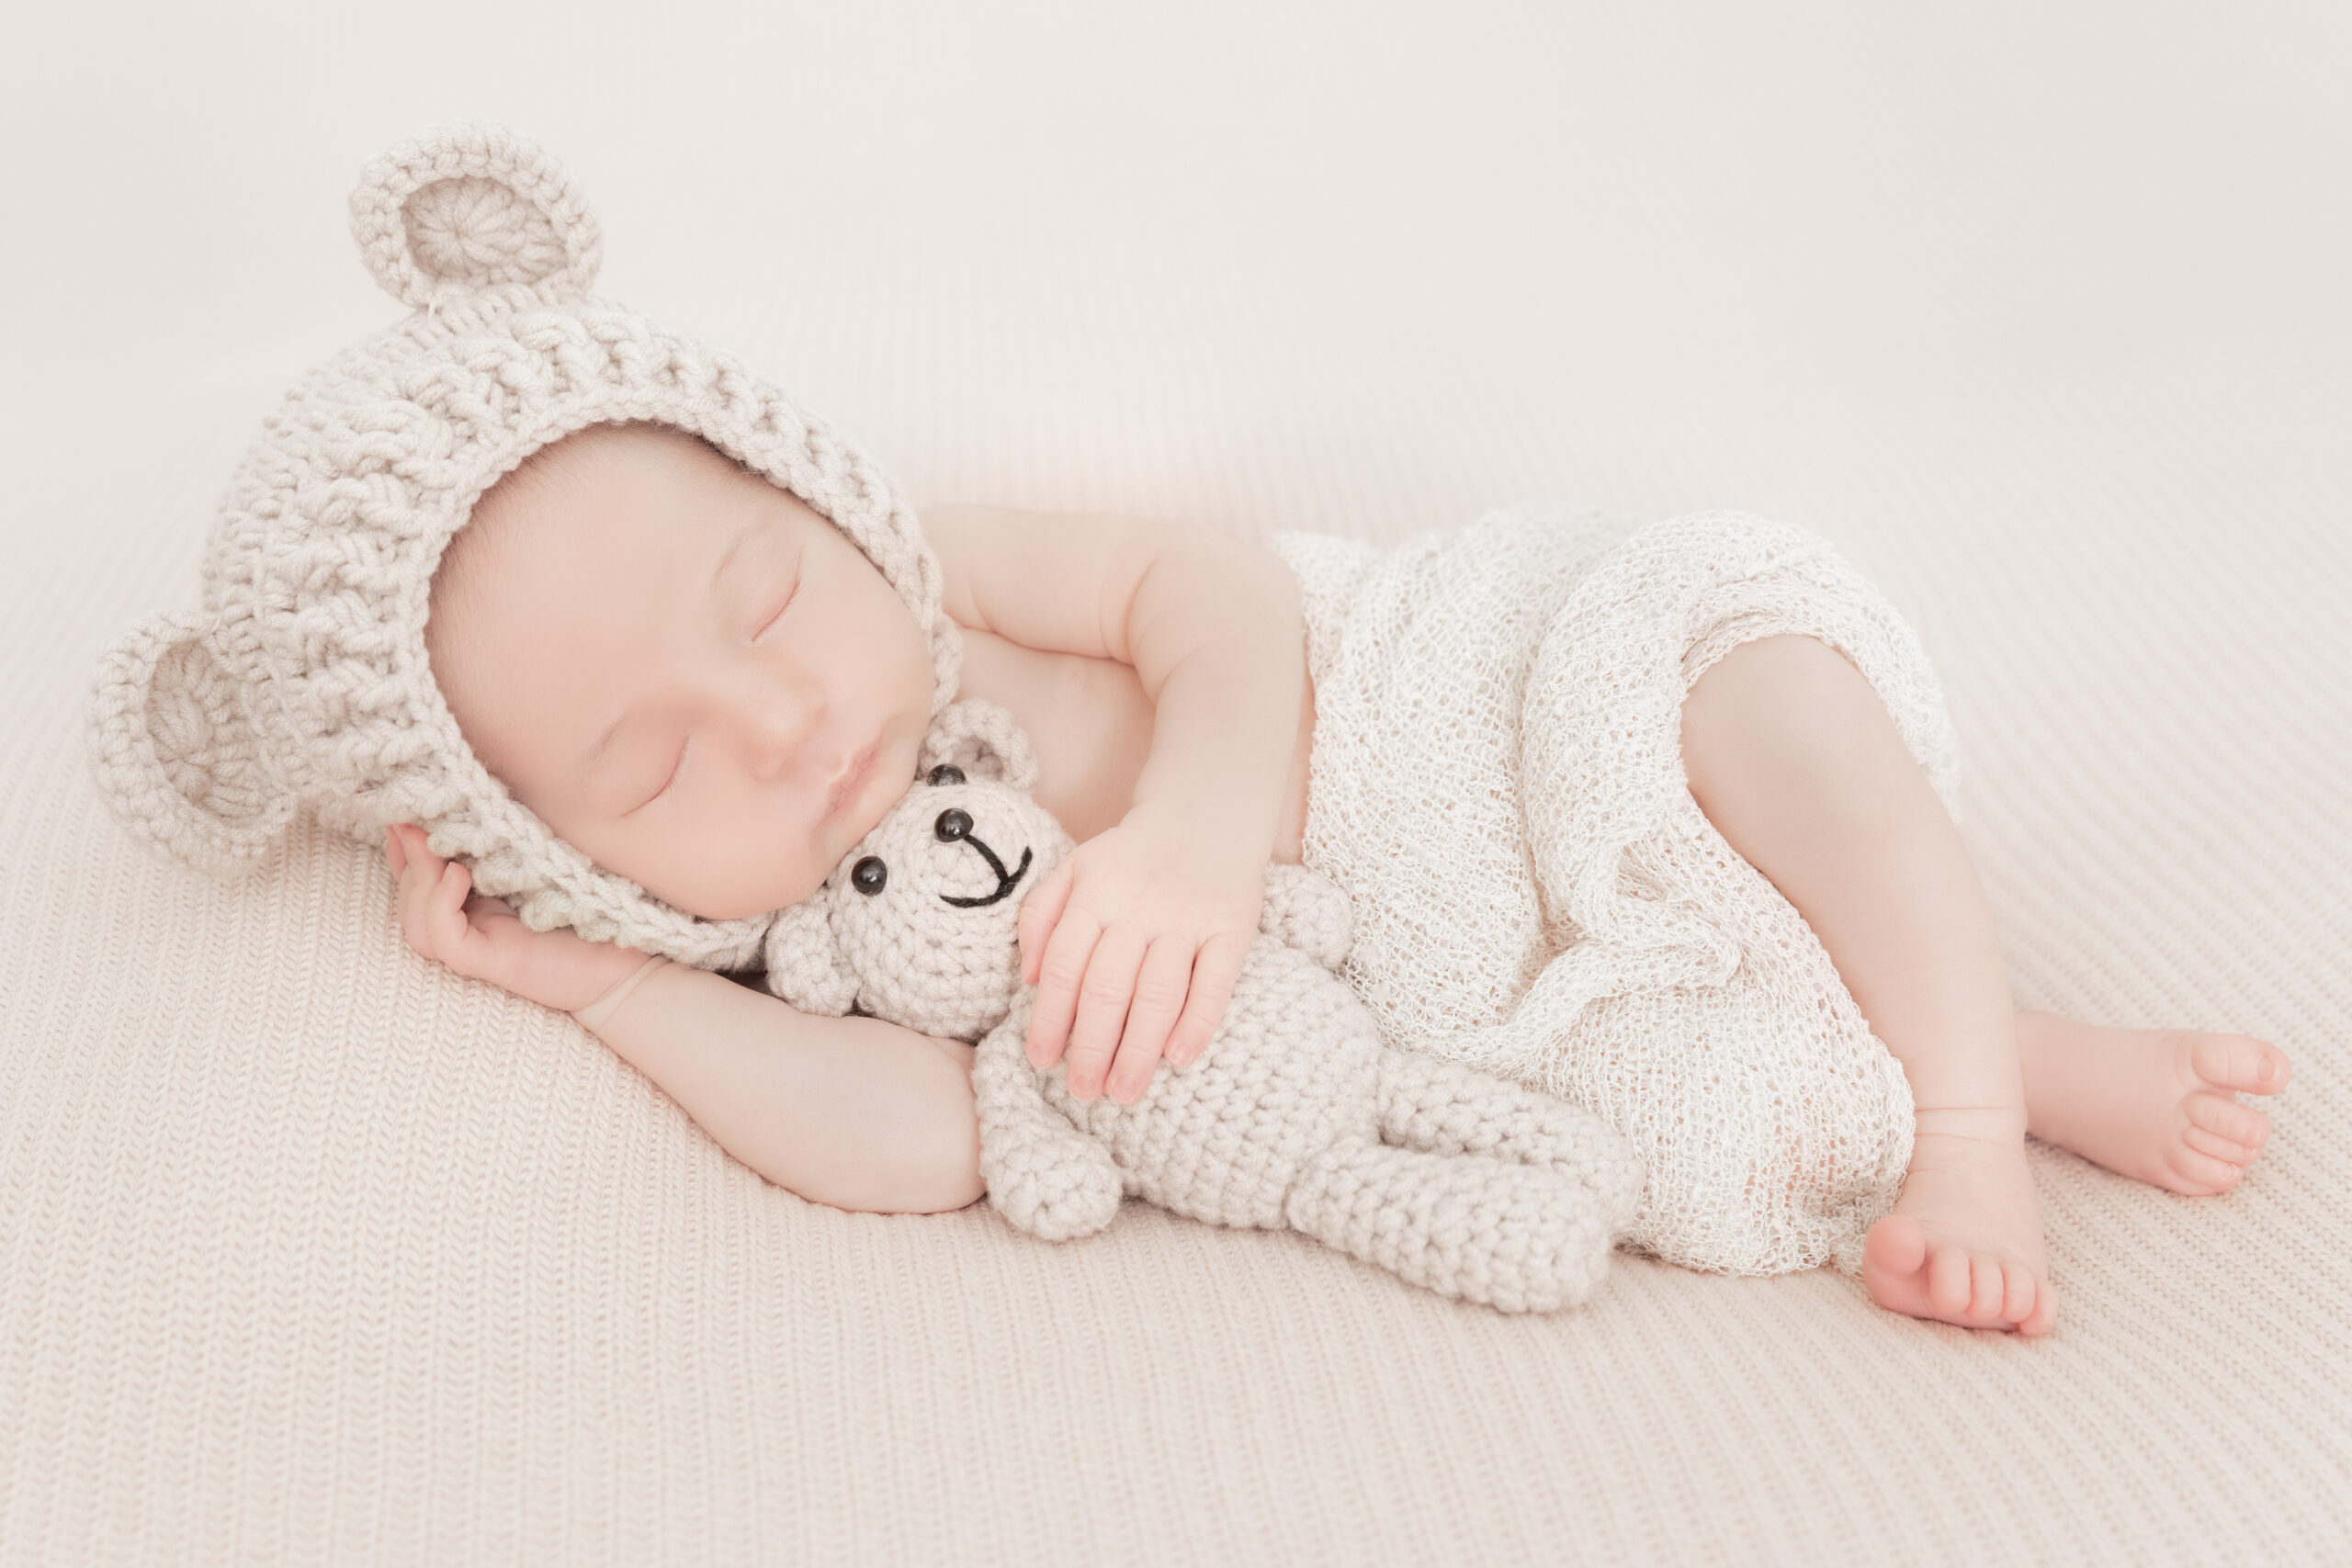 Newborn baby with knitted cap holding teddy bear